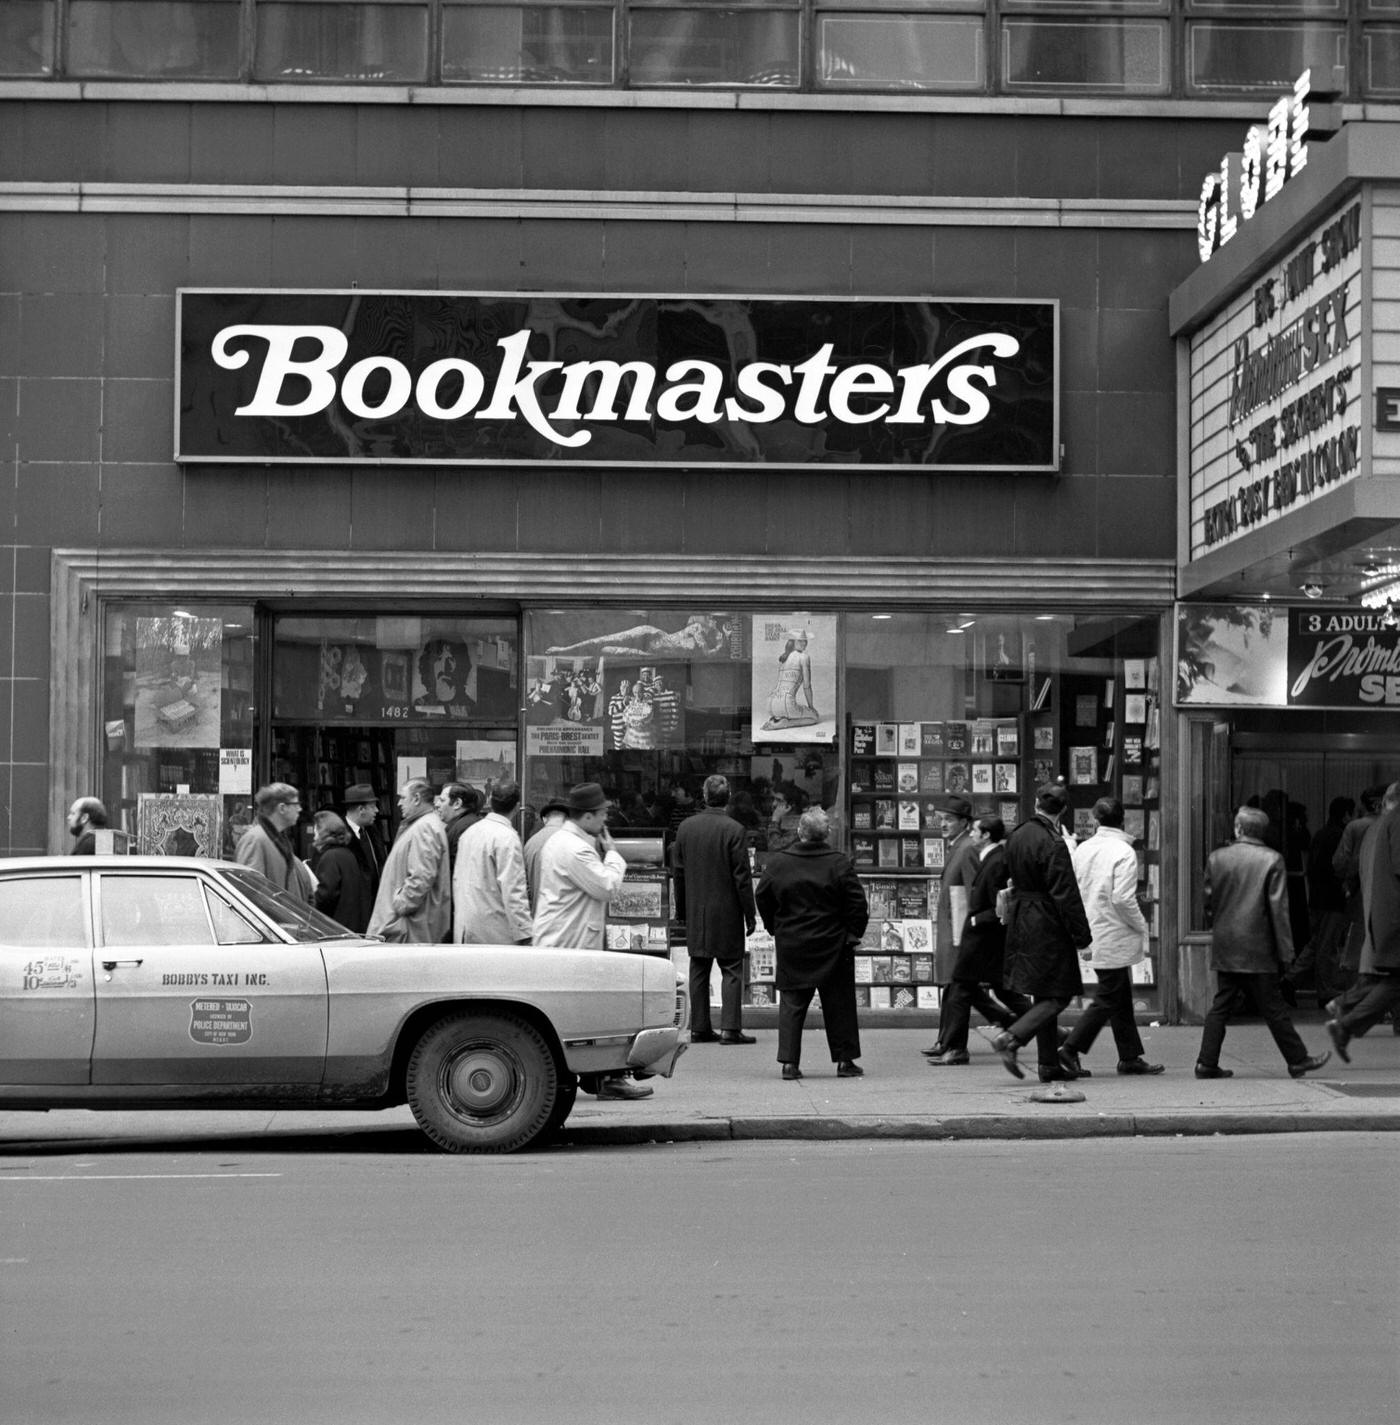 Bookmasters Store Located Next To The Adult Movie Oriented Globe Theater In Midtown Manhattan, 1969